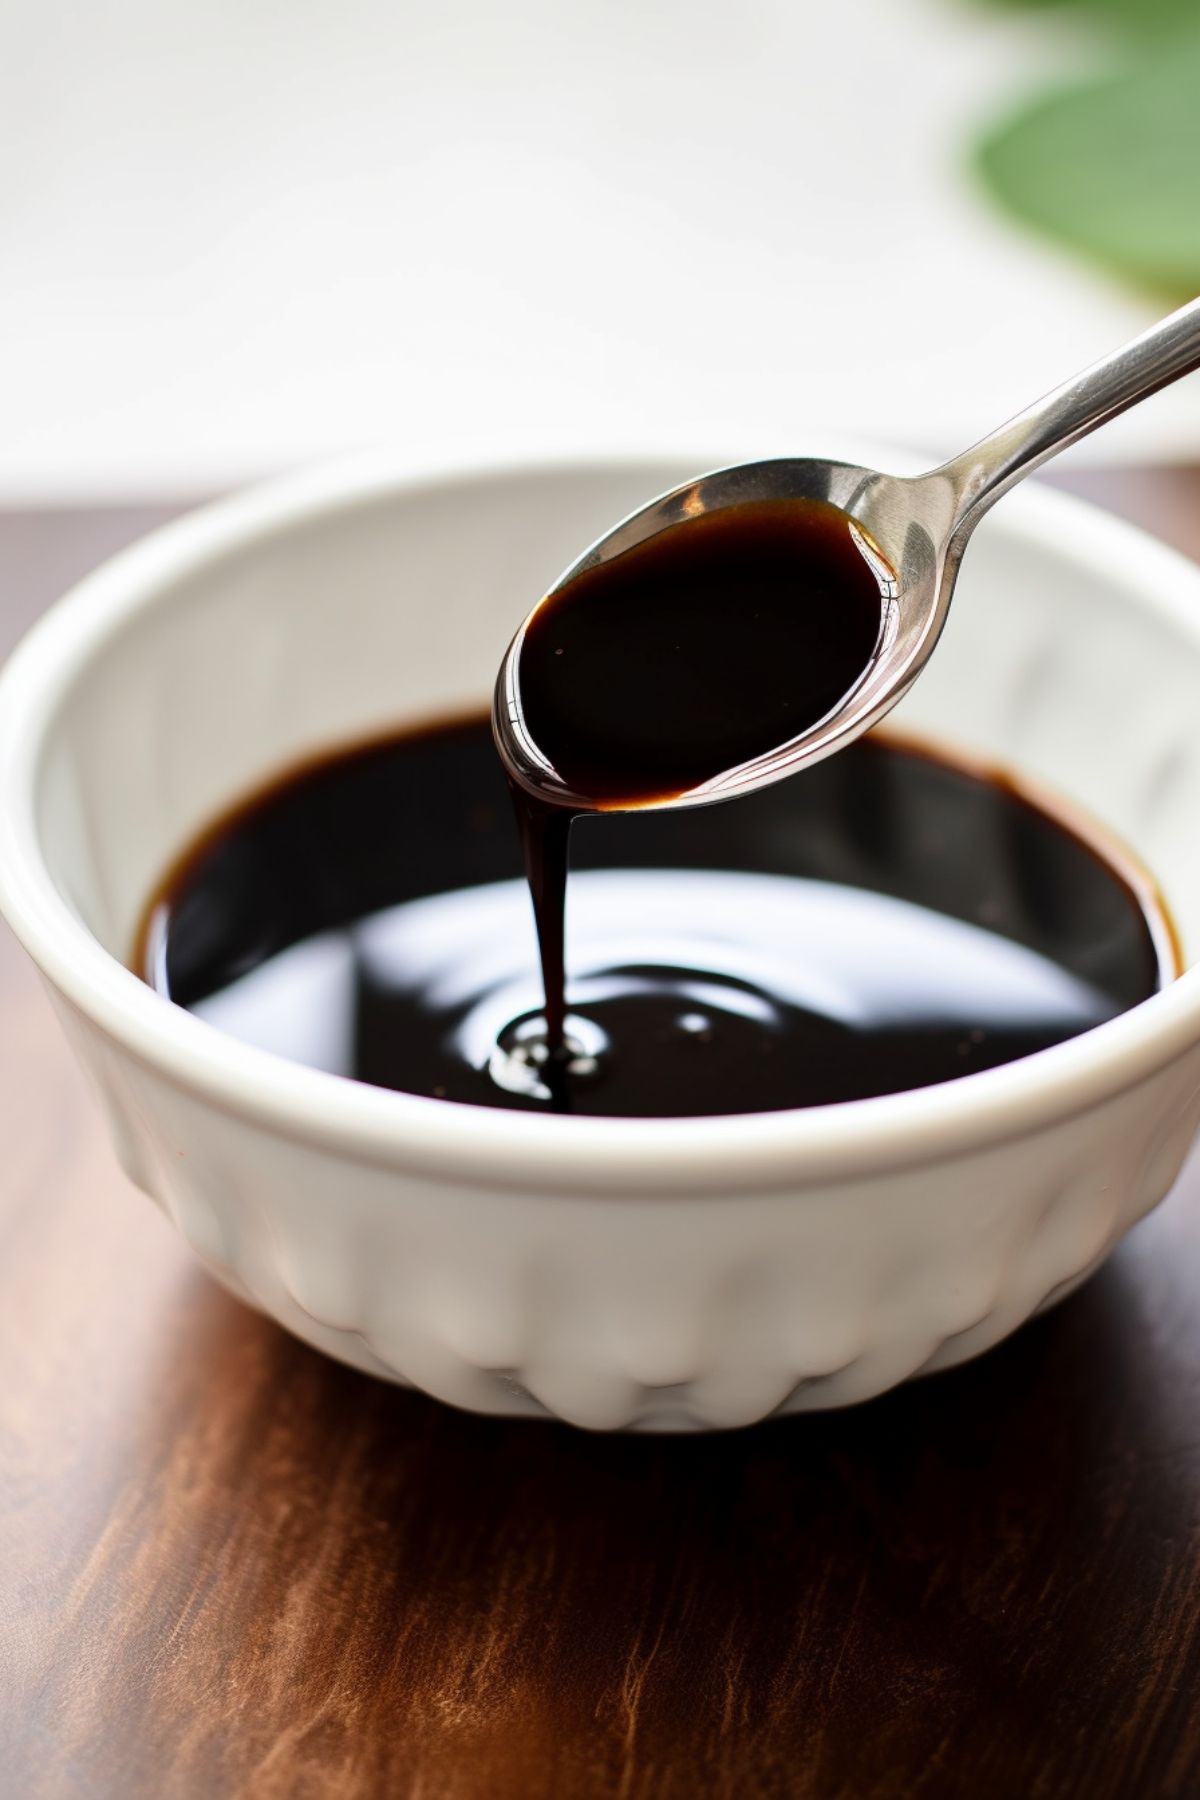 A spoon drizzling balsamic glaze into a small white bowl.